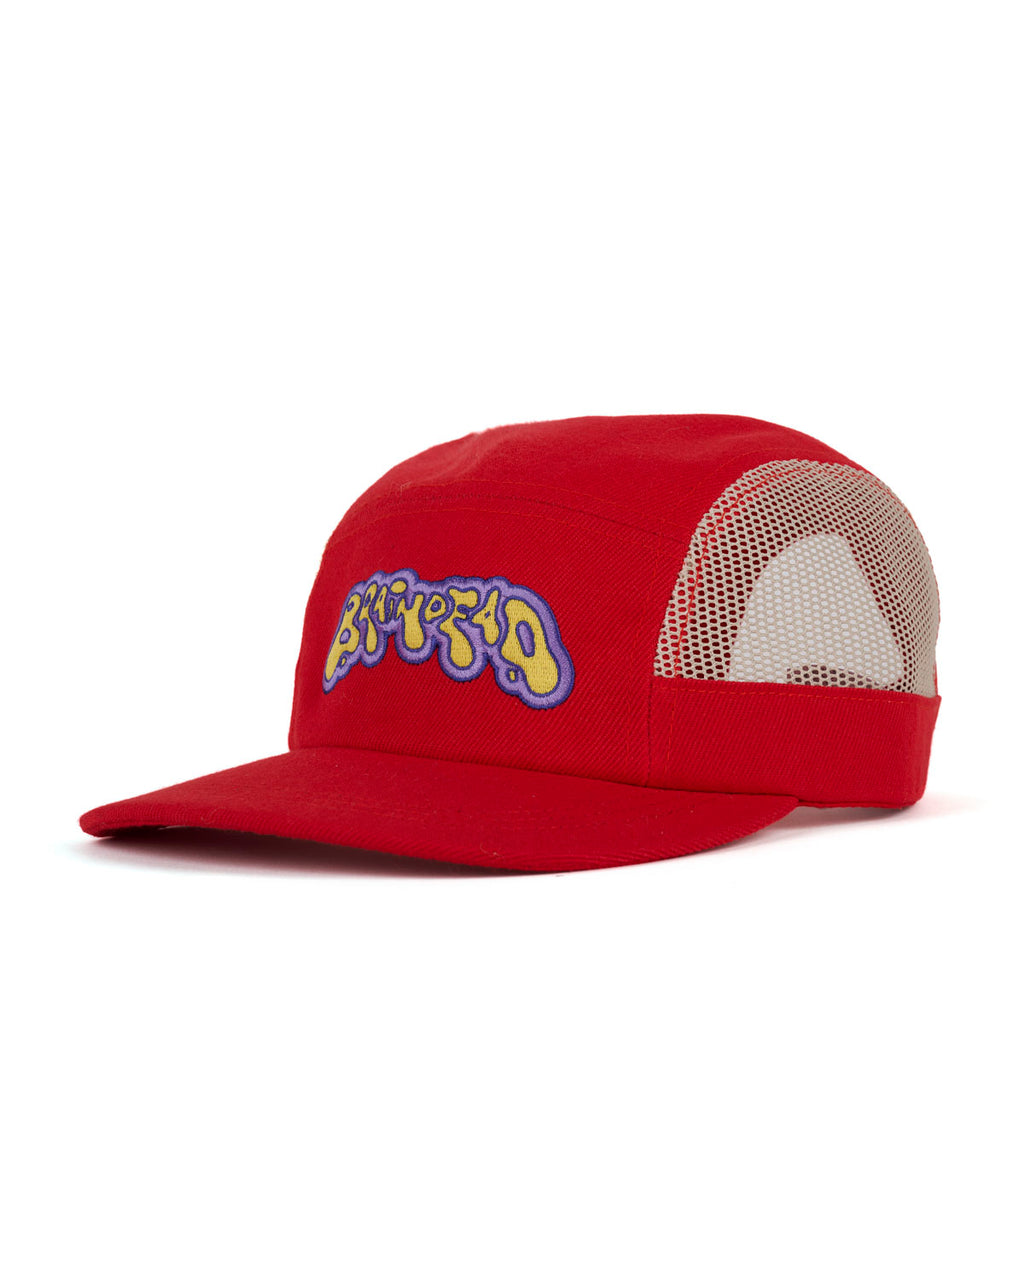 Mesh Panel Camp Hat - Red 3